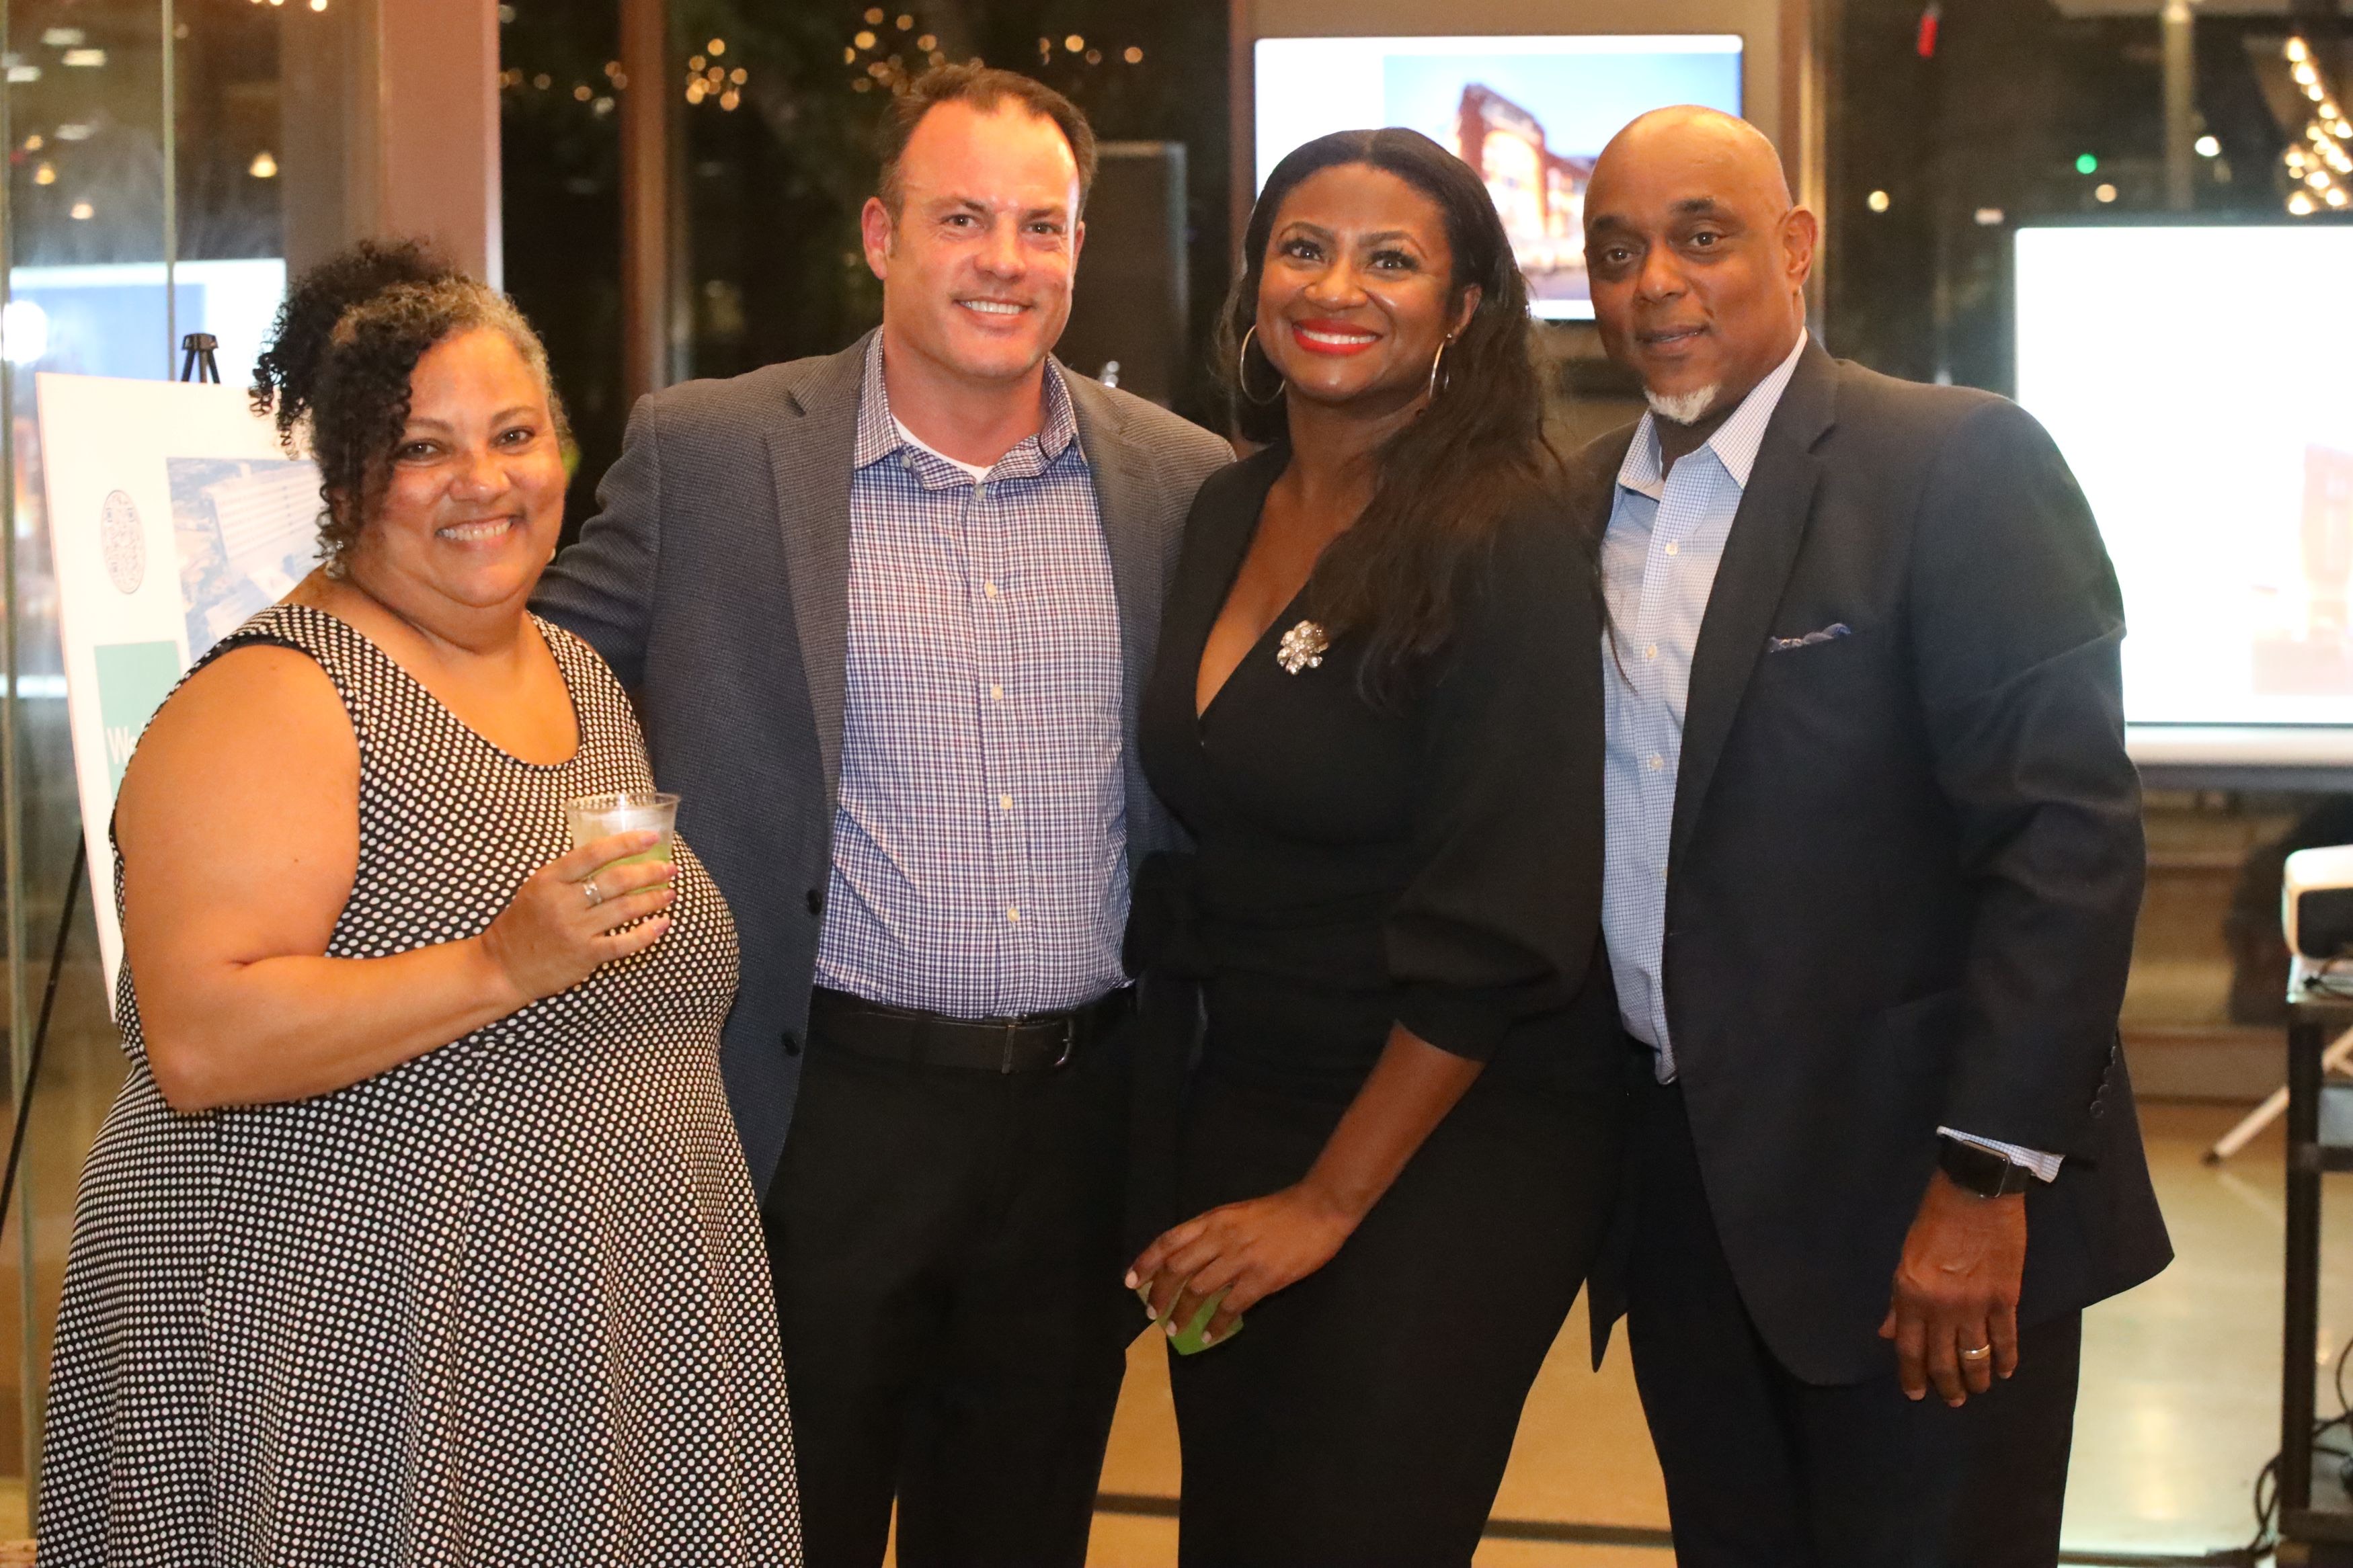 The H.J Russell team, after a successful “We Build Dallas” reception